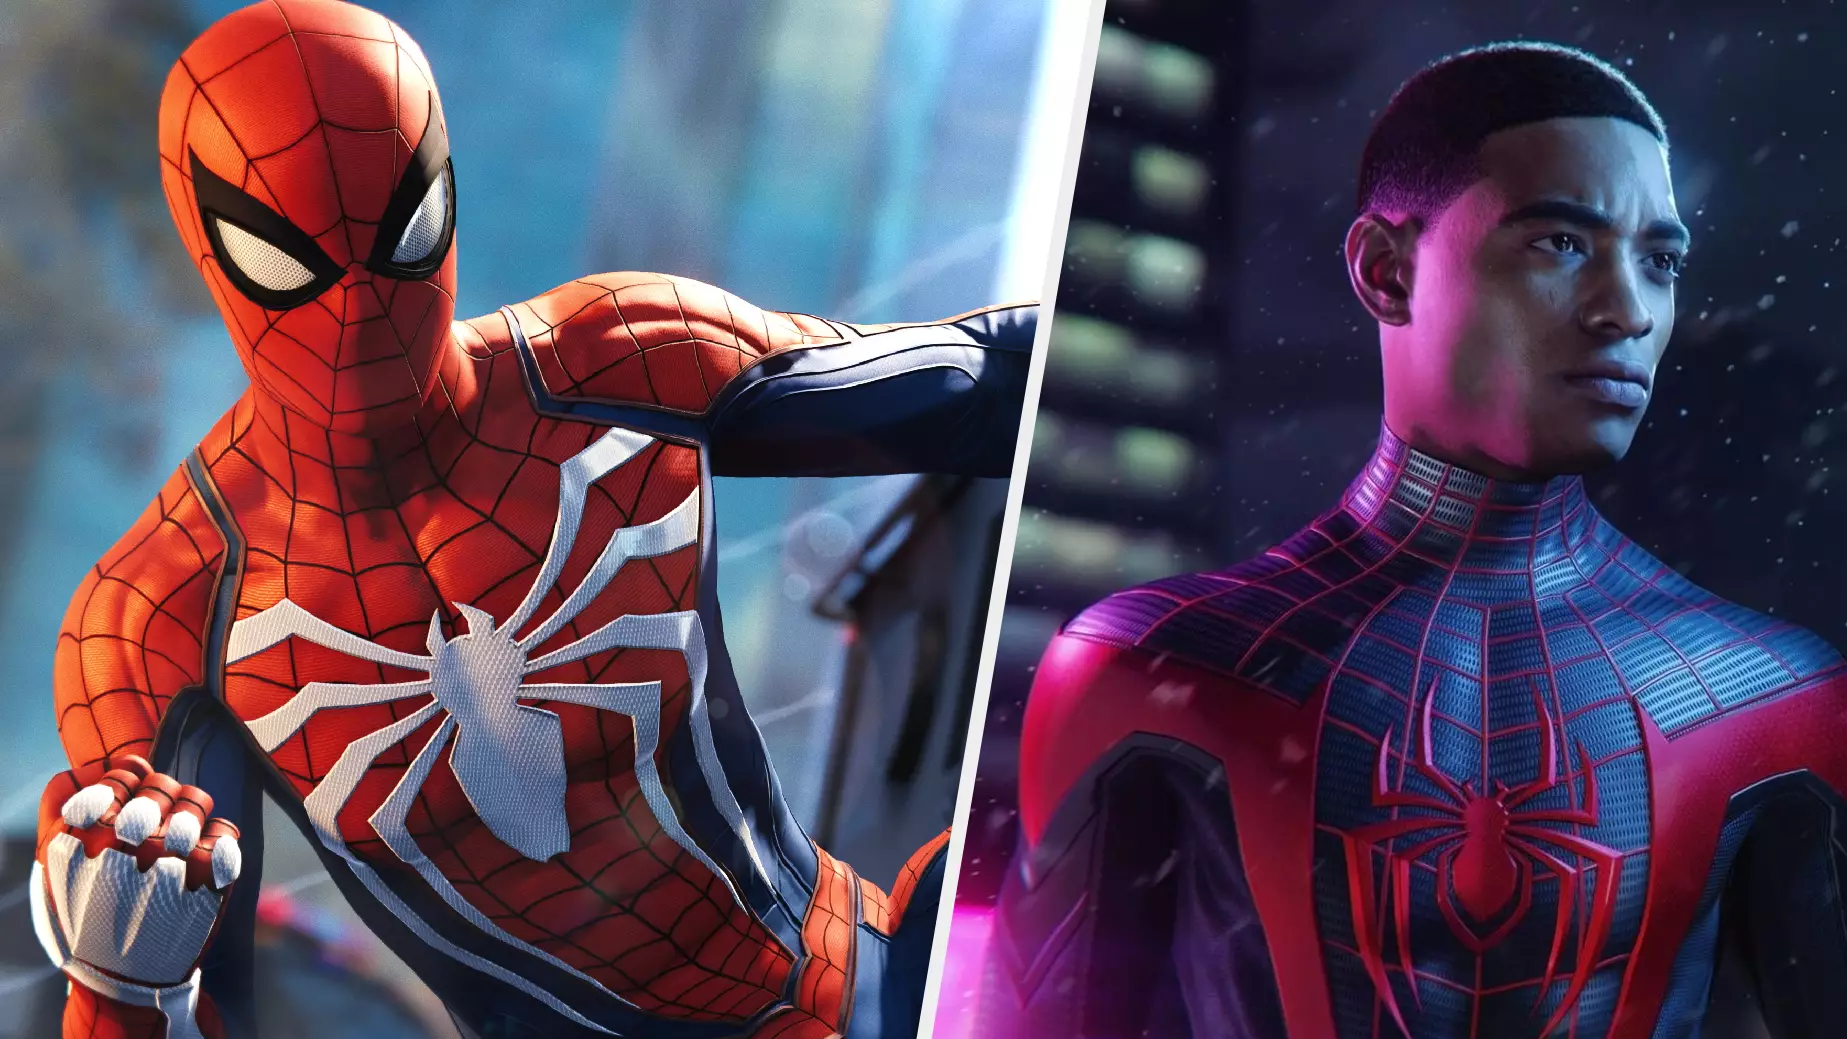 You Can Win A Limited Edition Prize For Beating 'Marvel's Spider-Man'